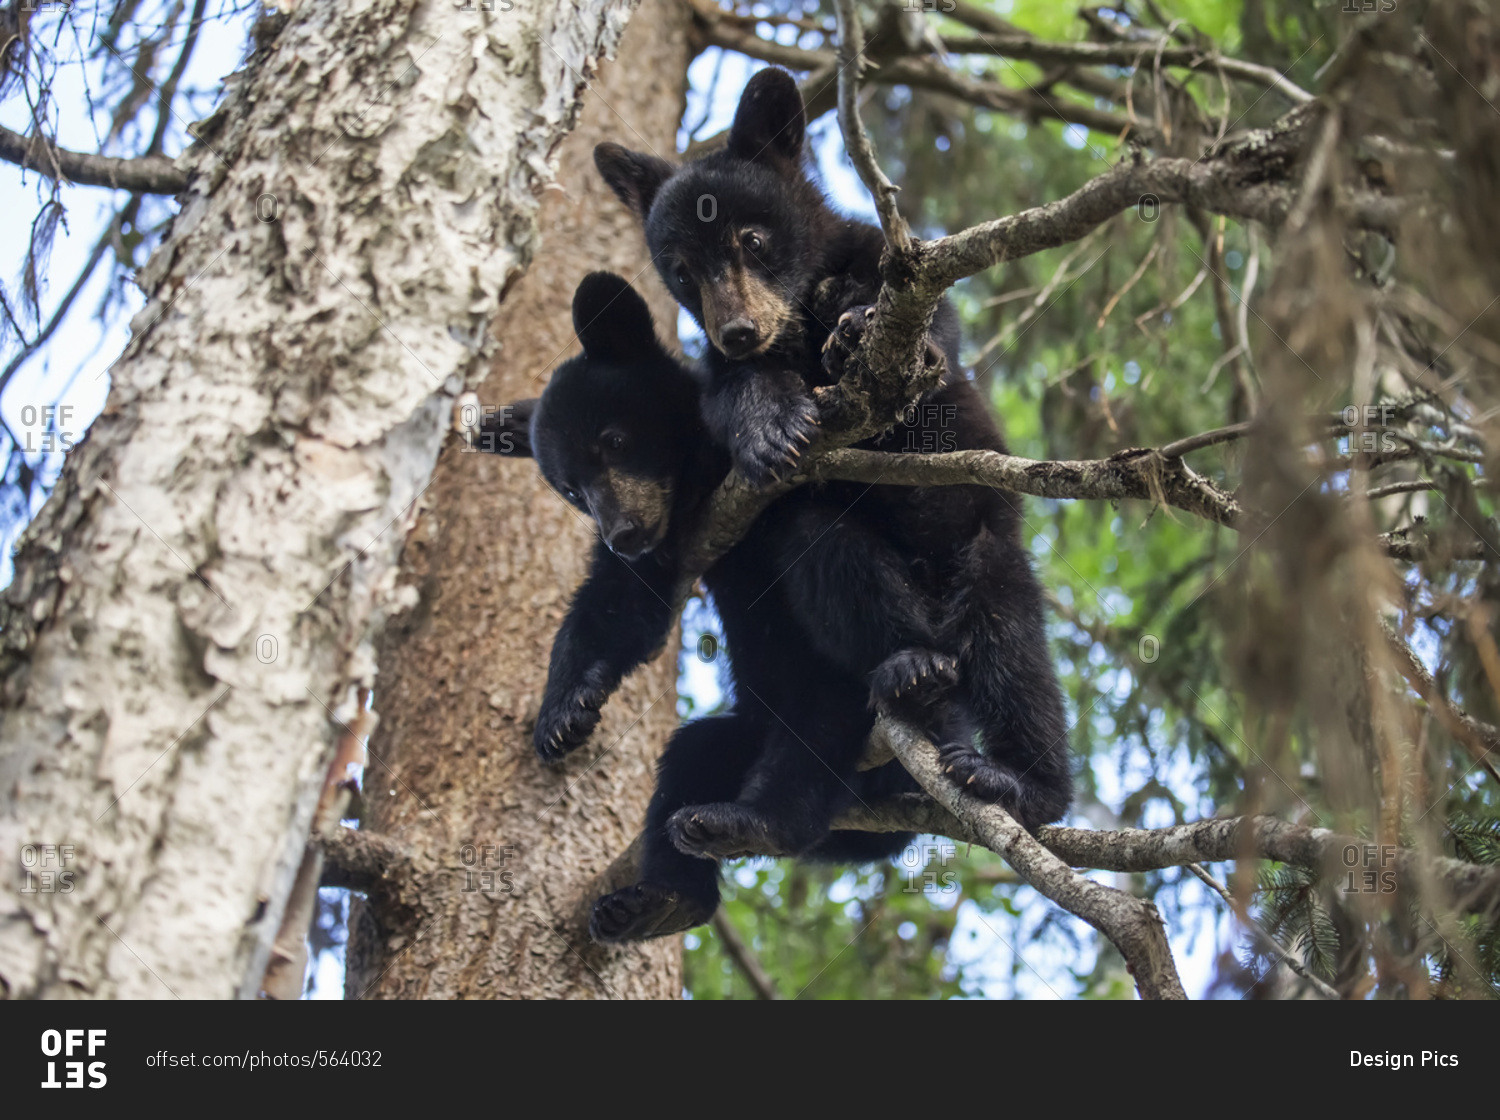 Black bear (Ursus americanus) cubs playing on the tree branches, South-central Alaska, Alaska, United States of America